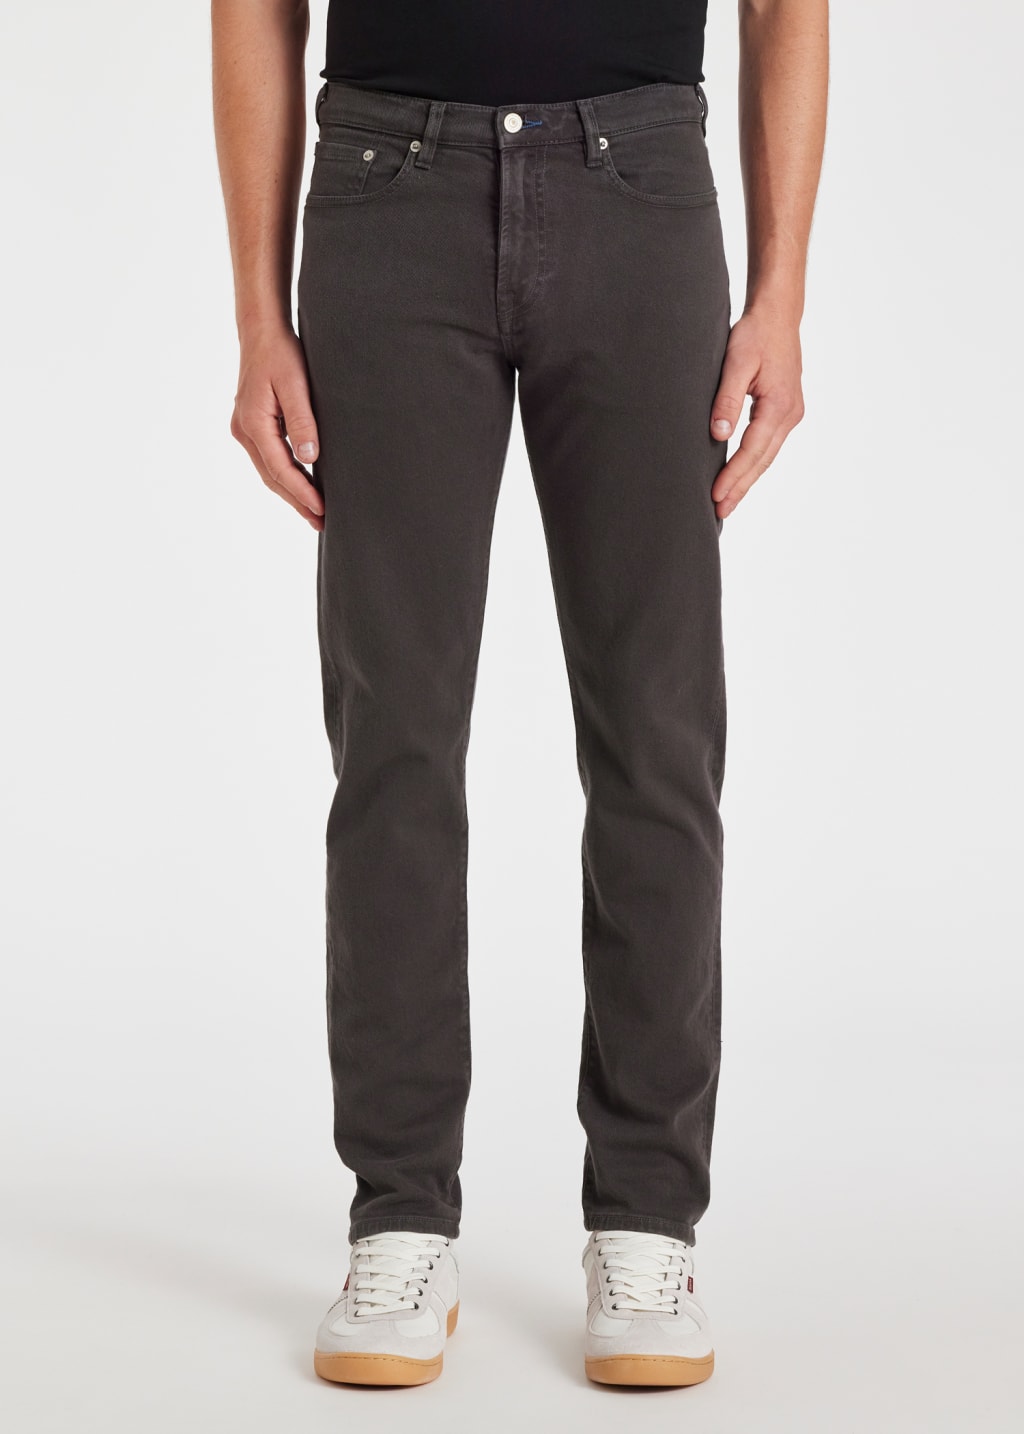 Men's Tapered-Fit Dark Grey Garment-Dyed Jeans